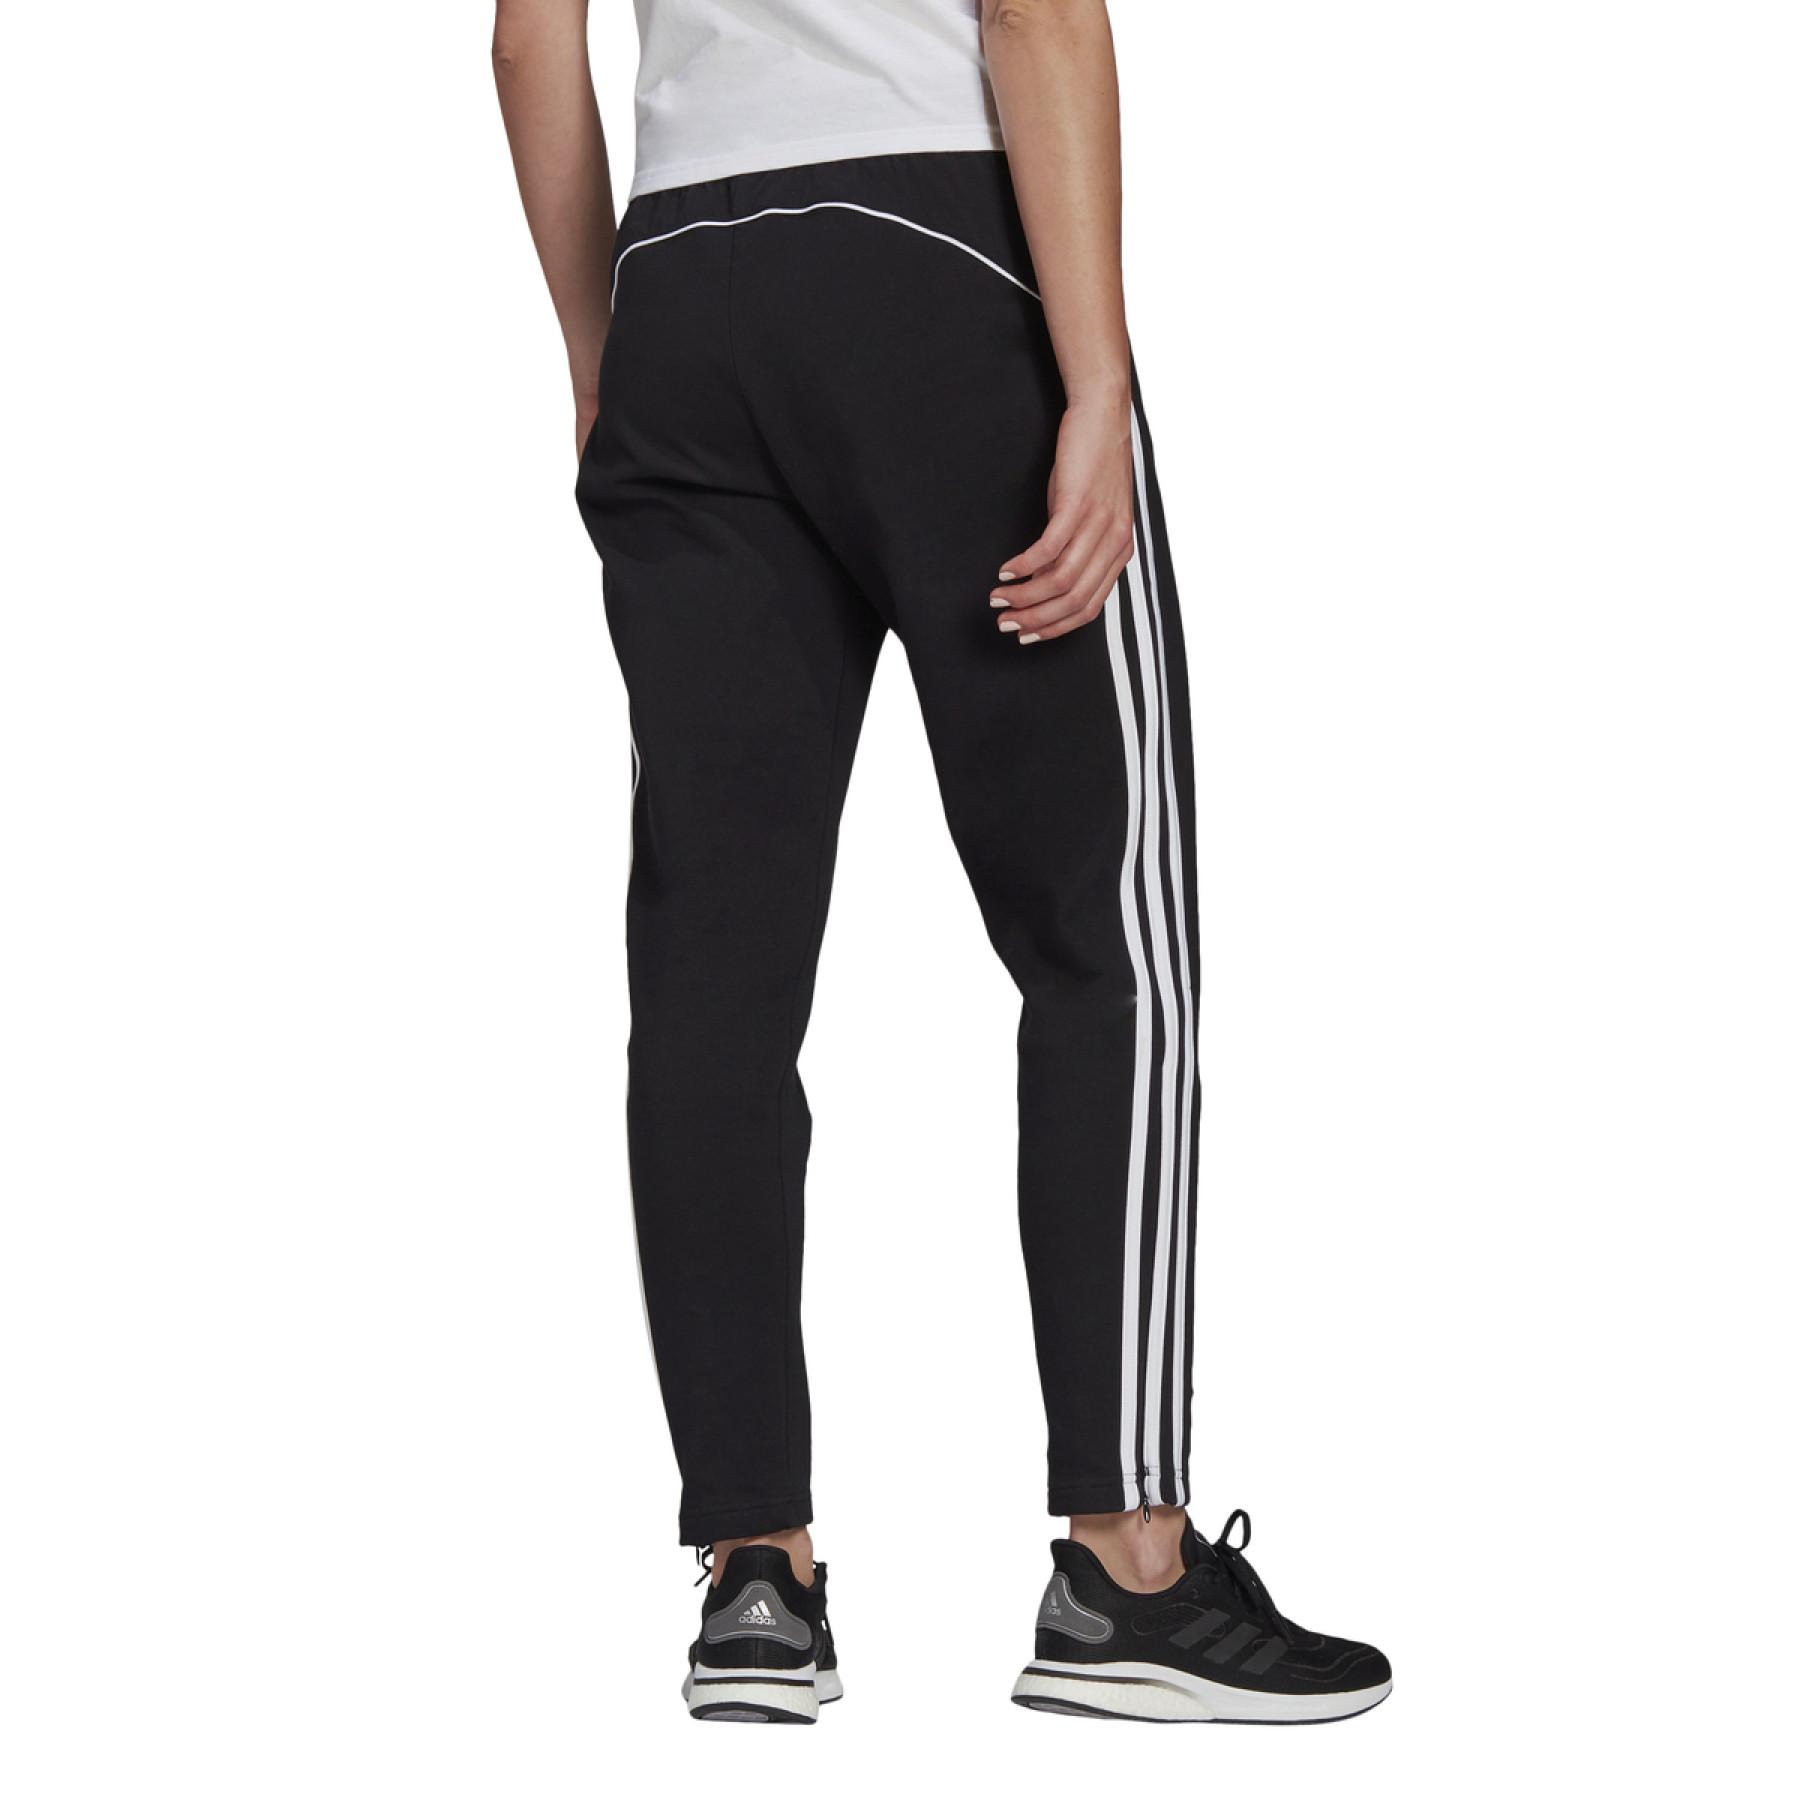 Women's trousers adidas Colorblocked Regular Fit